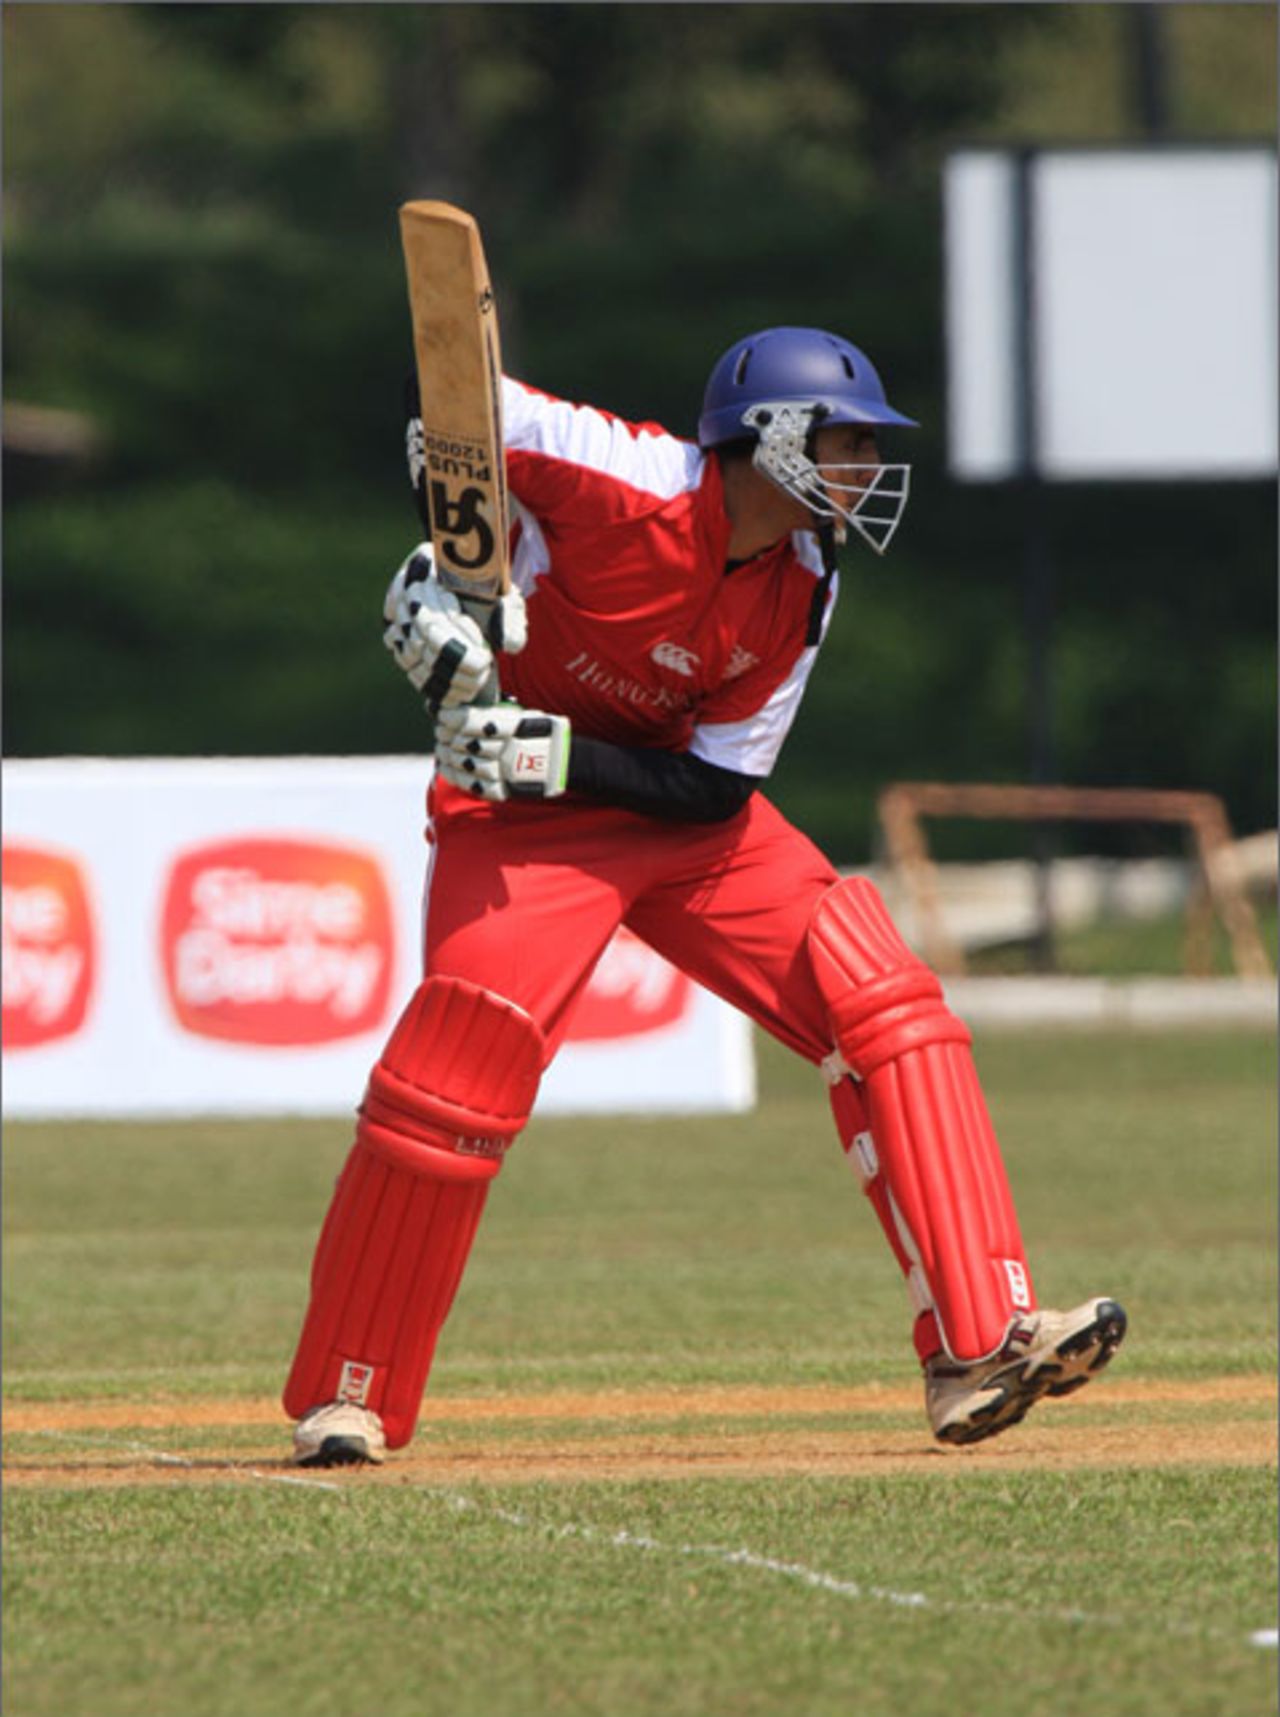 Zain Abbas's 80 against Singapore won him the Man of the Match award. ACCTrophy 30.07.2008<br>
Photo courtesy Peter Lim / Asian Cricket Council 